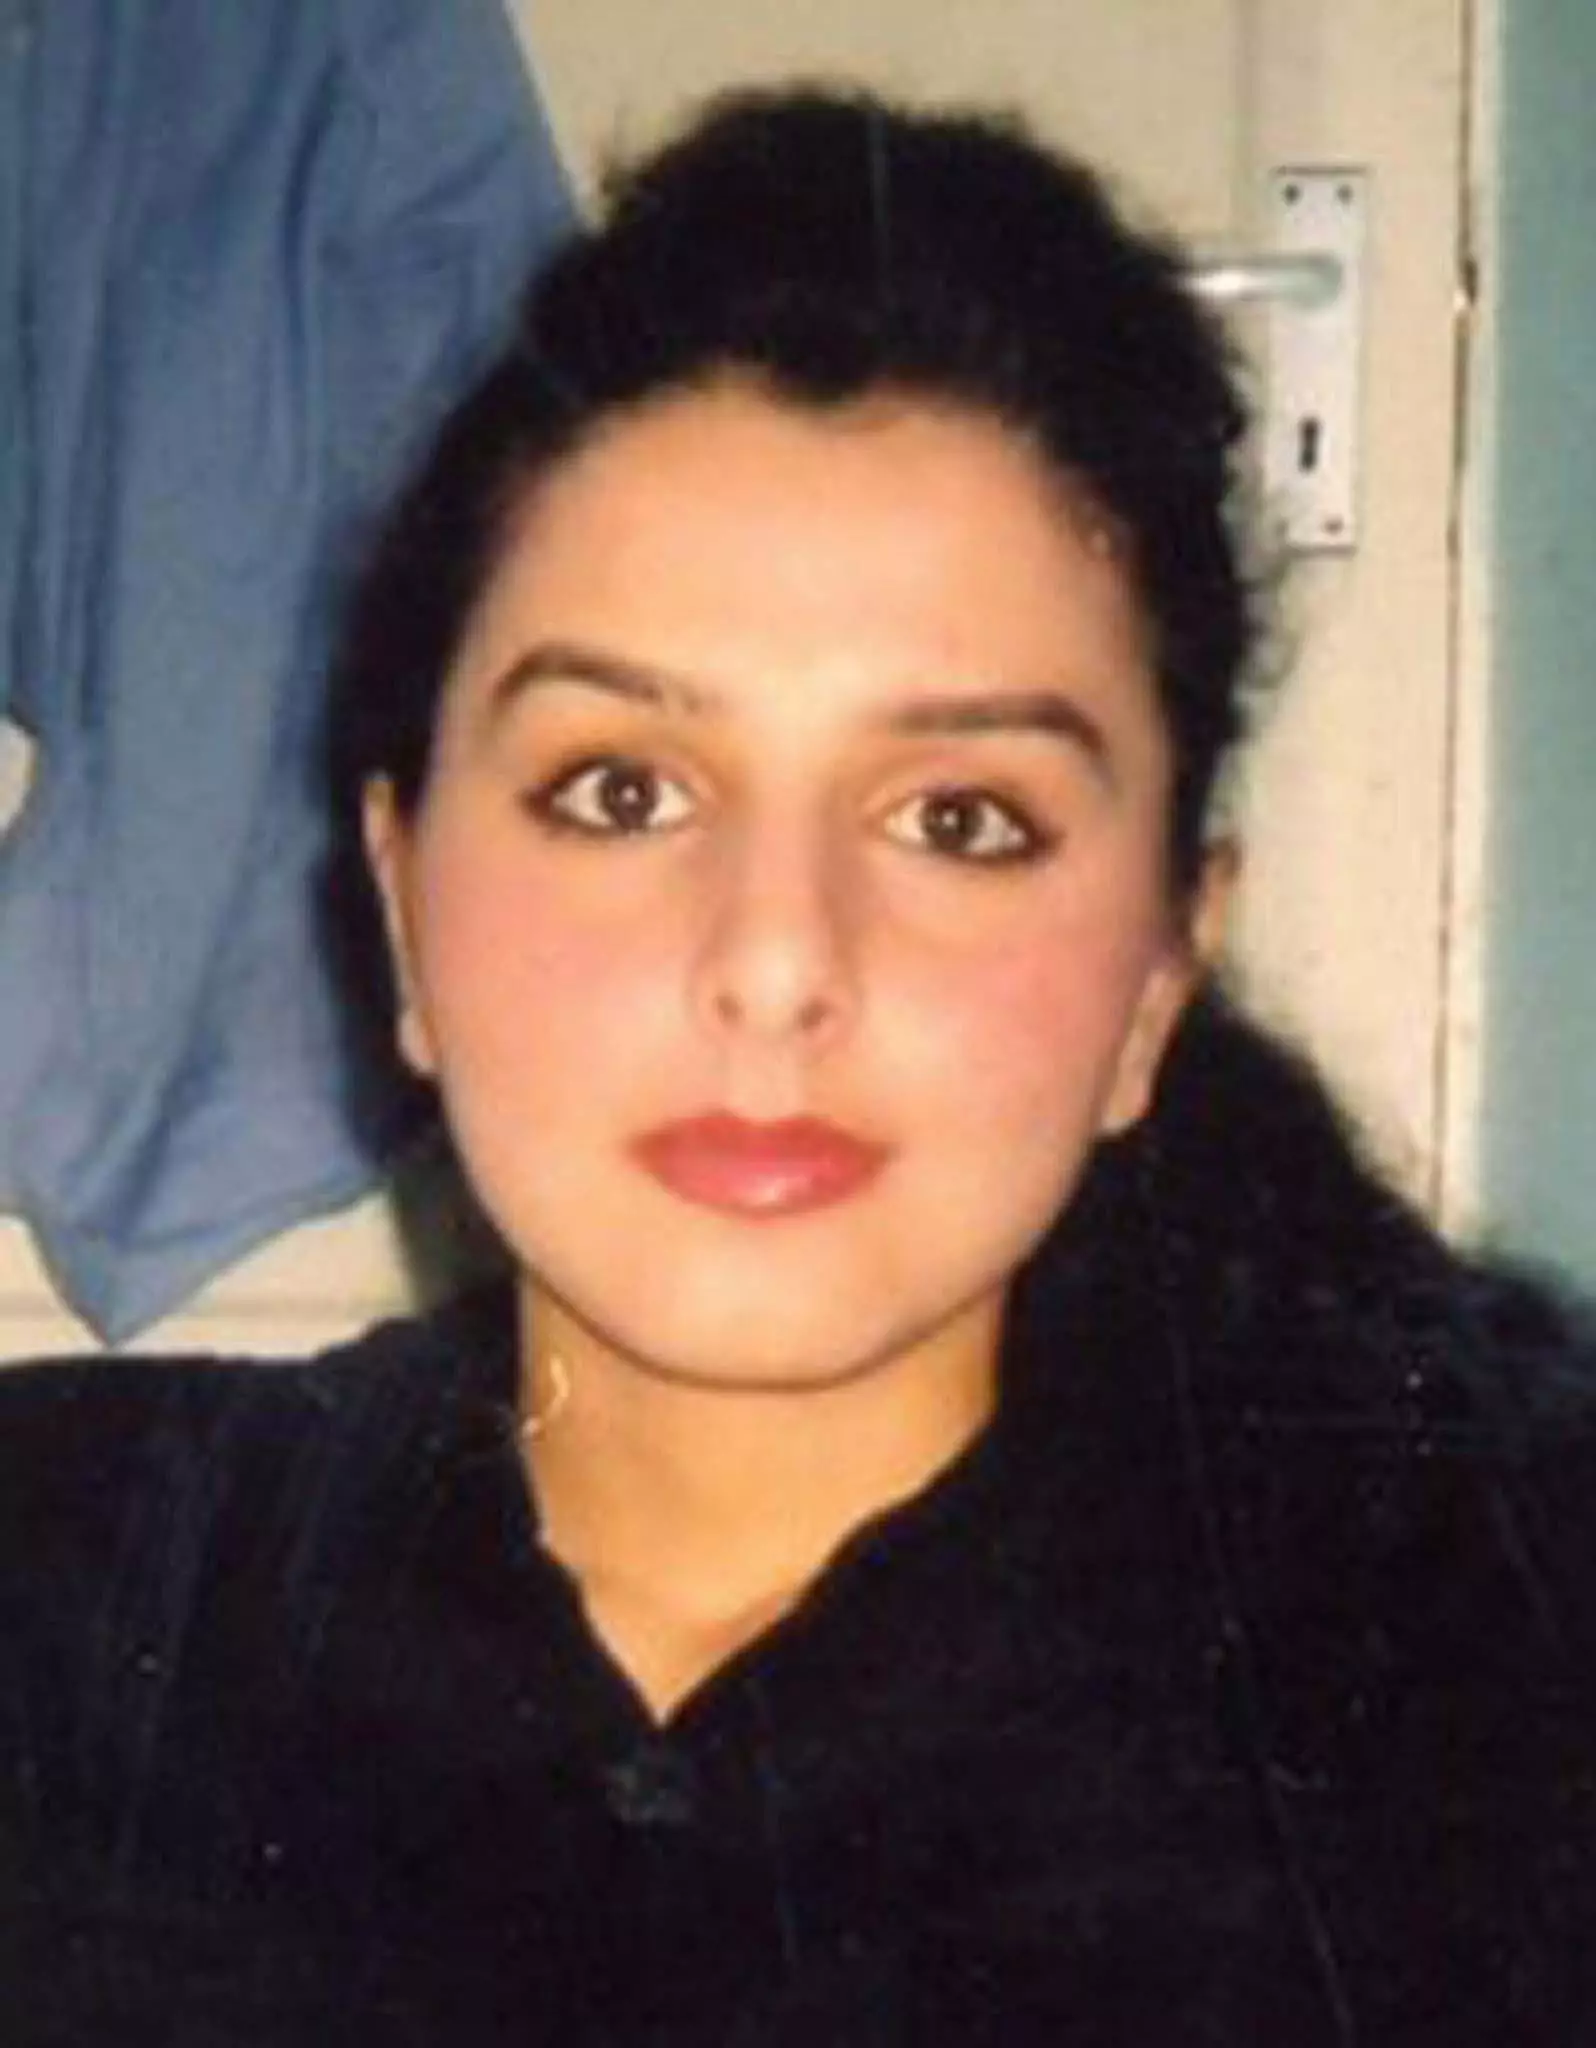 Banaz was raped and strangled to death by her own family (